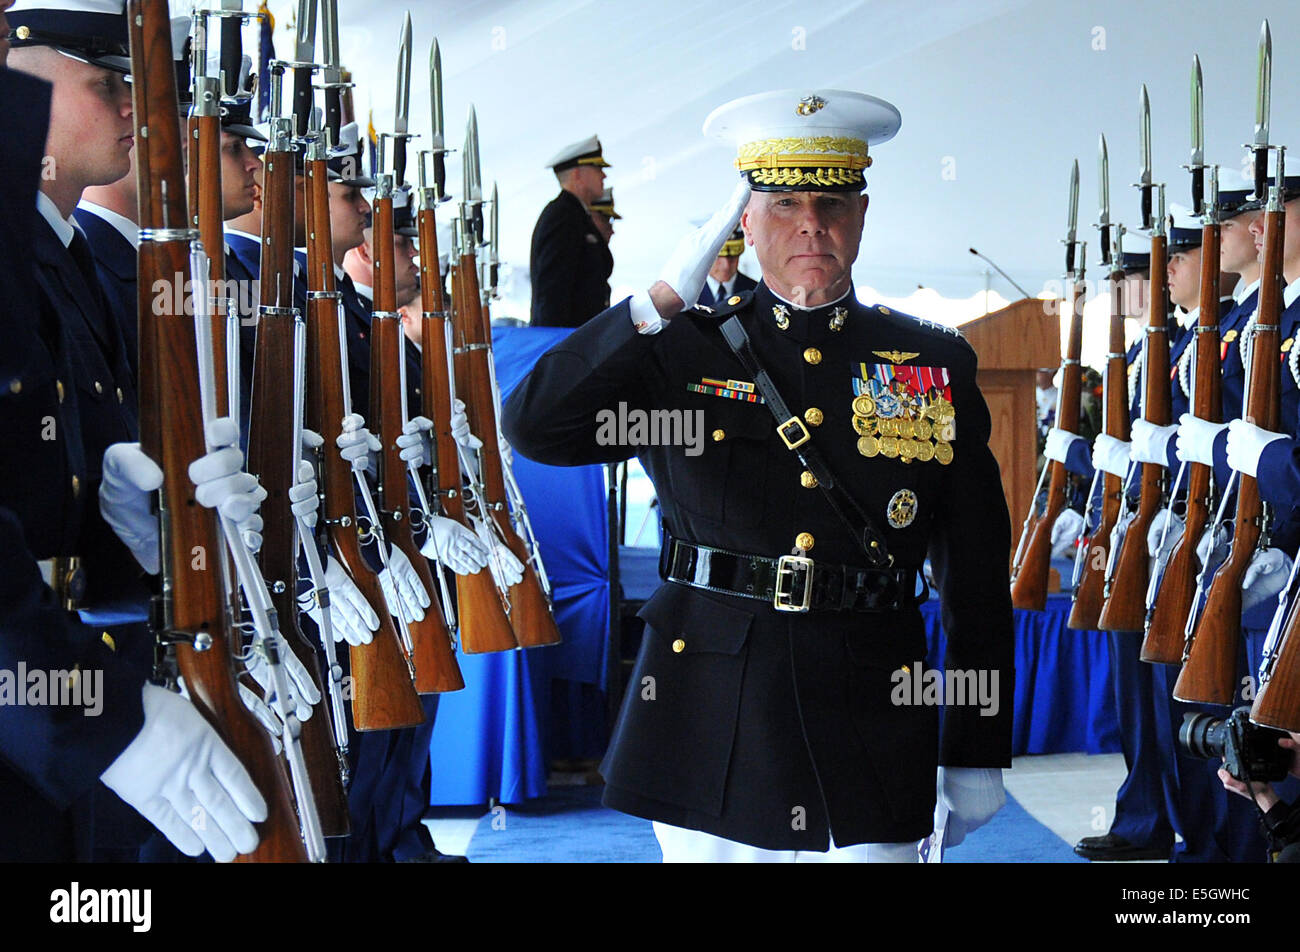 U.S. Marine Corps Gen. James Amos, the commandant of the Marine Corps, departs the stage during a change of command ceremony at Stock Photo